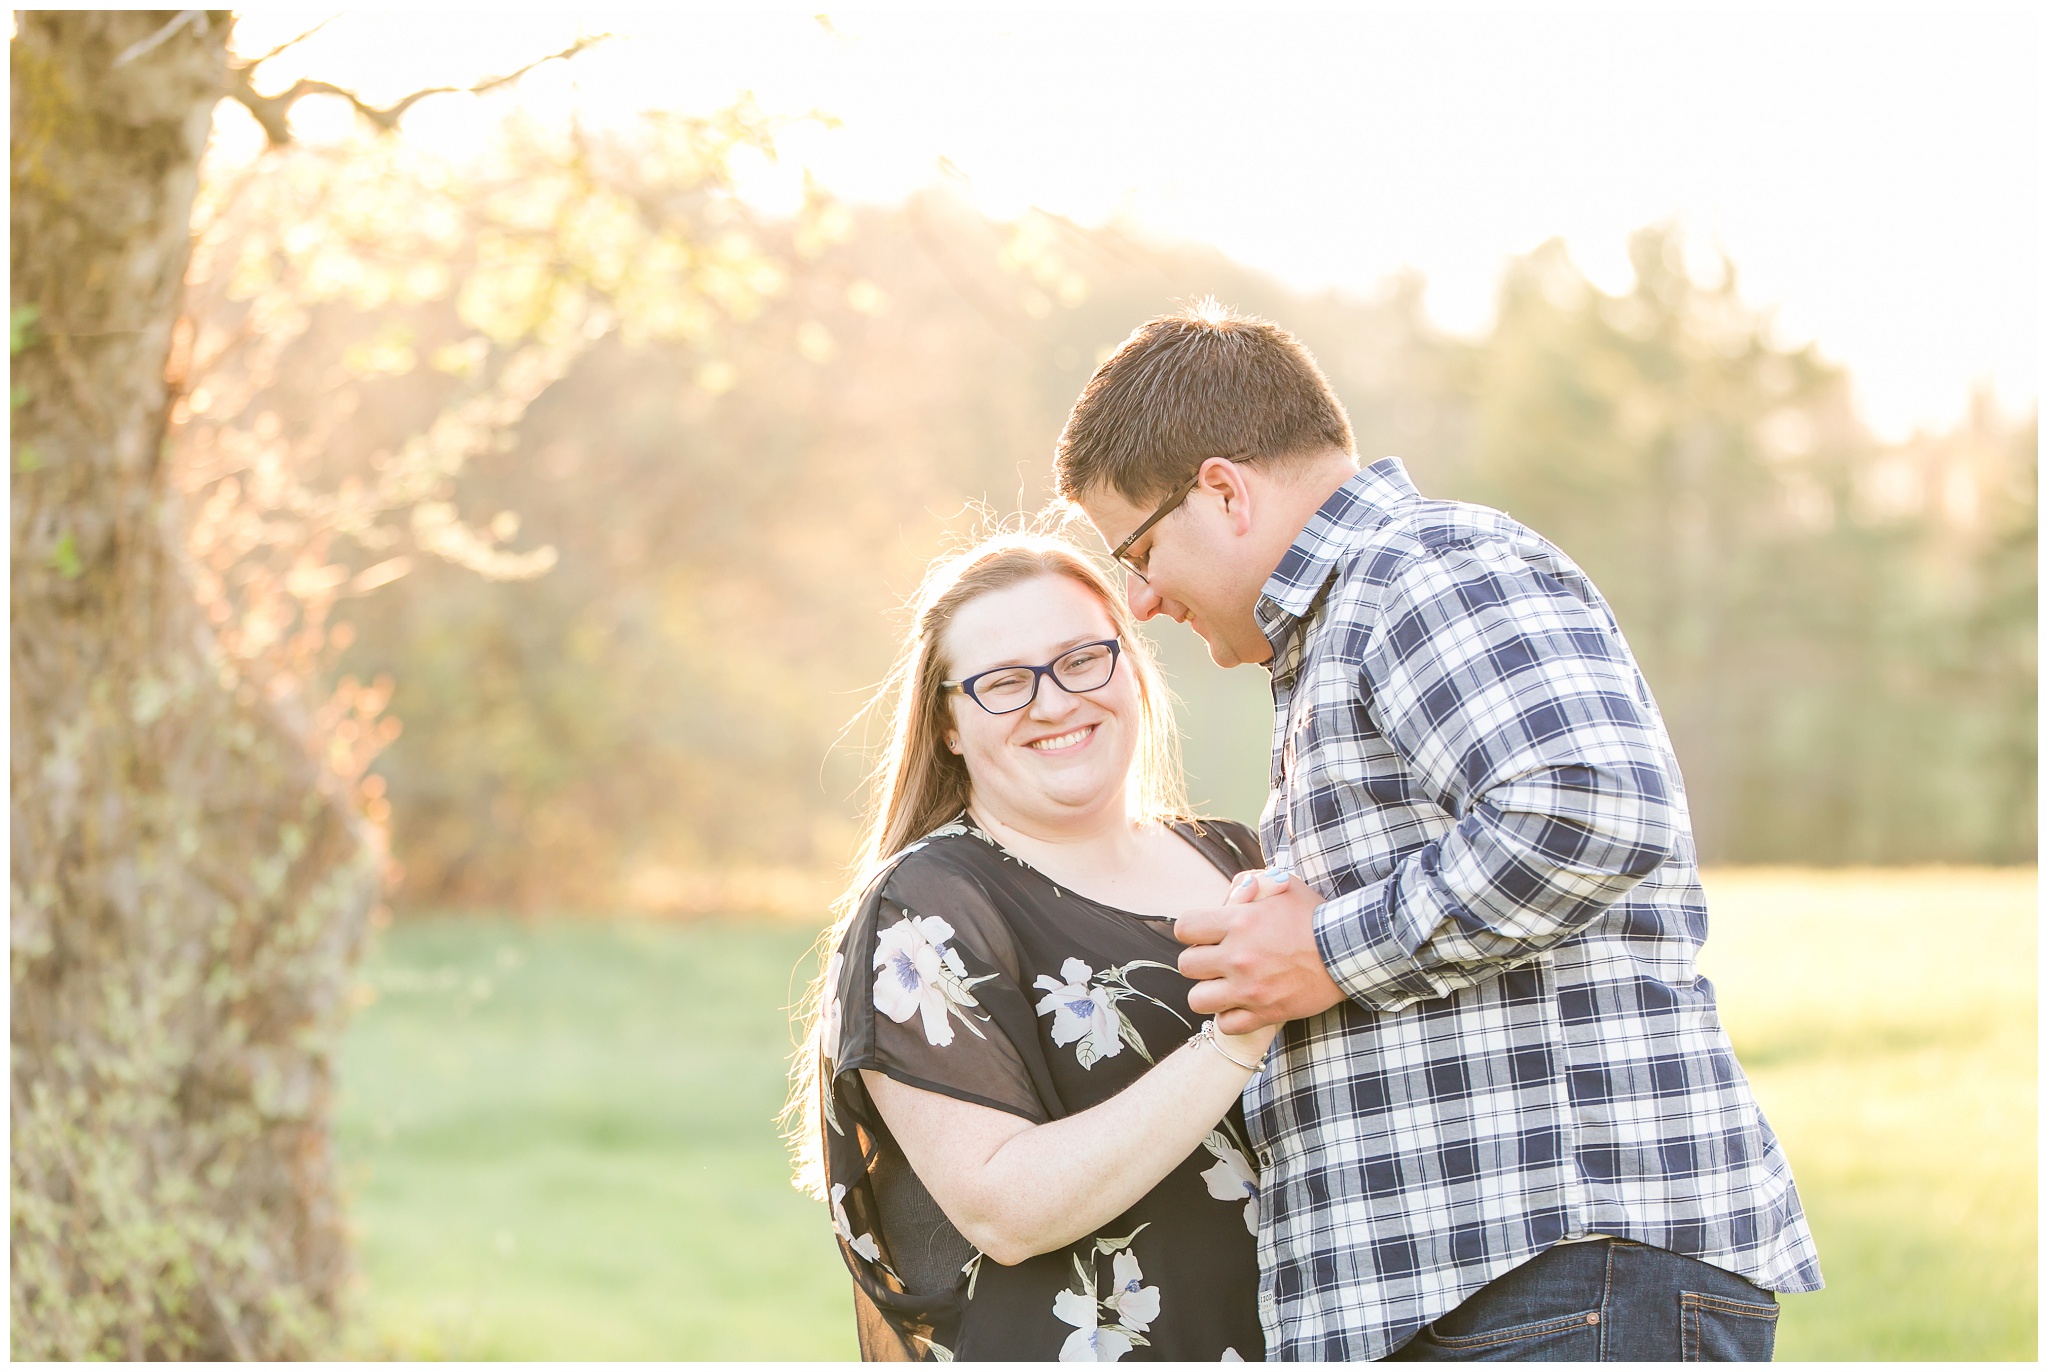 Wagon Hill Engagement Session, New Hampshire | Amy Brown Photography